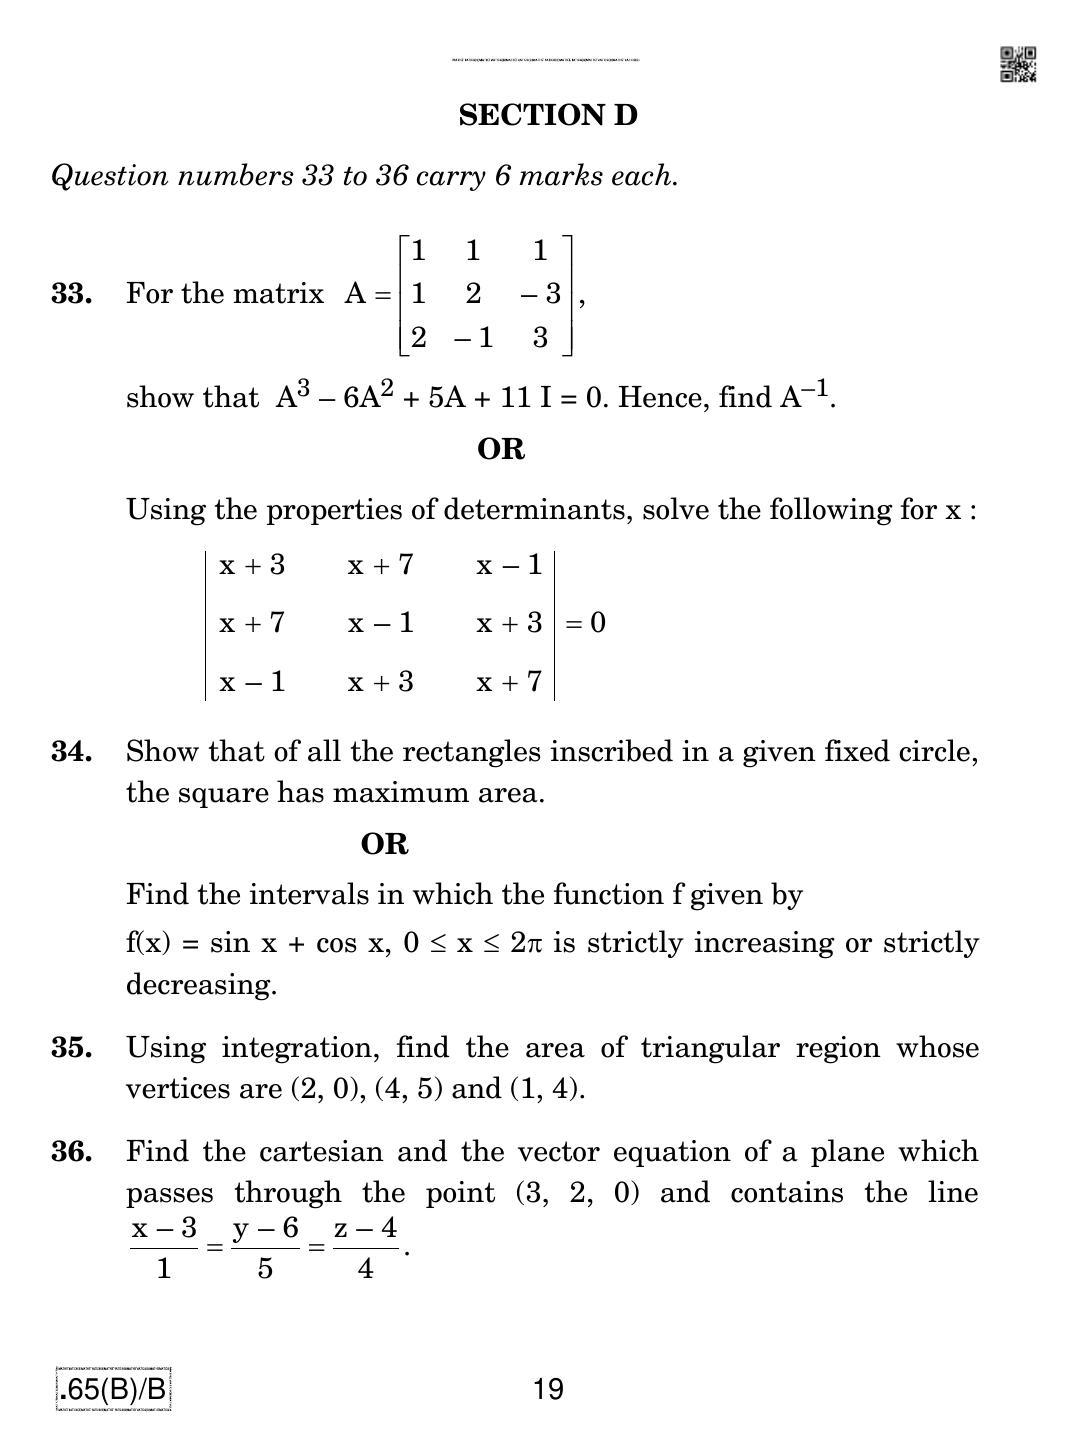 CBSE Class 12 65(B)-C - Maths For Blind Candidates 2020 Compartment Question Paper - Page 19